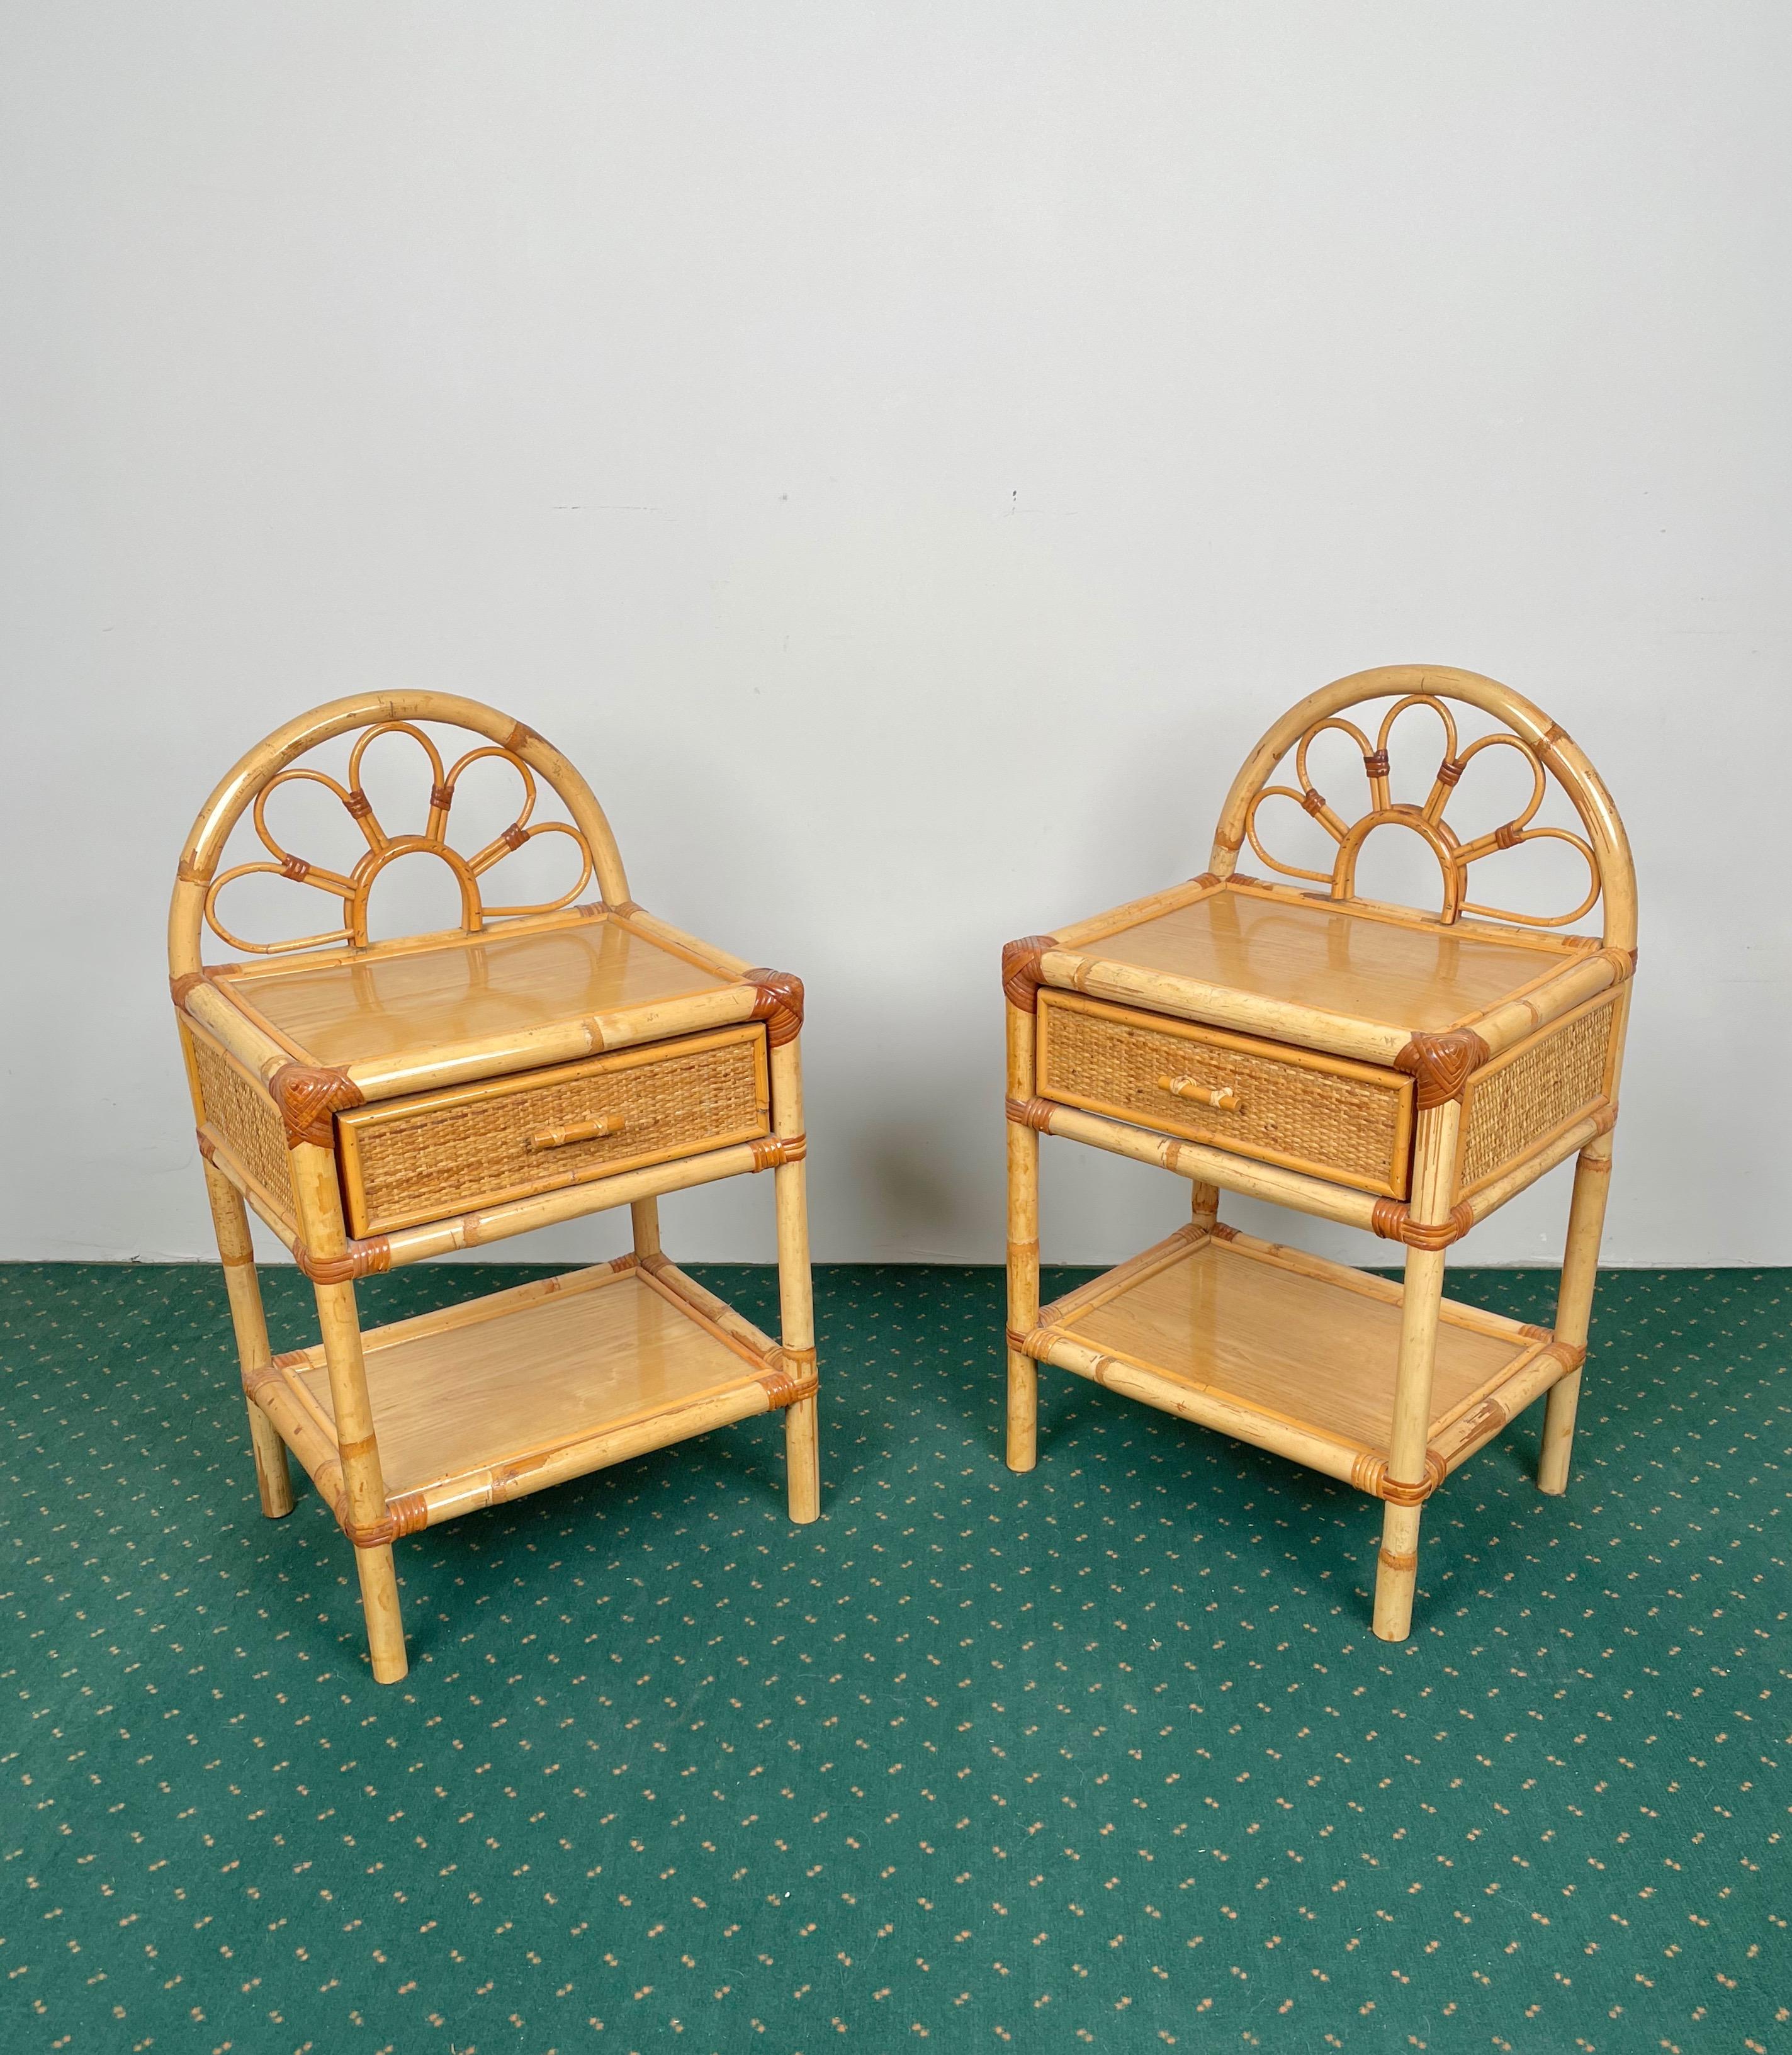 Pair of beside tables in bamboo and rattan, each featuring a drawer embellished with bamboo doodles and a lower shelf. Made in Italy in the 1970s.